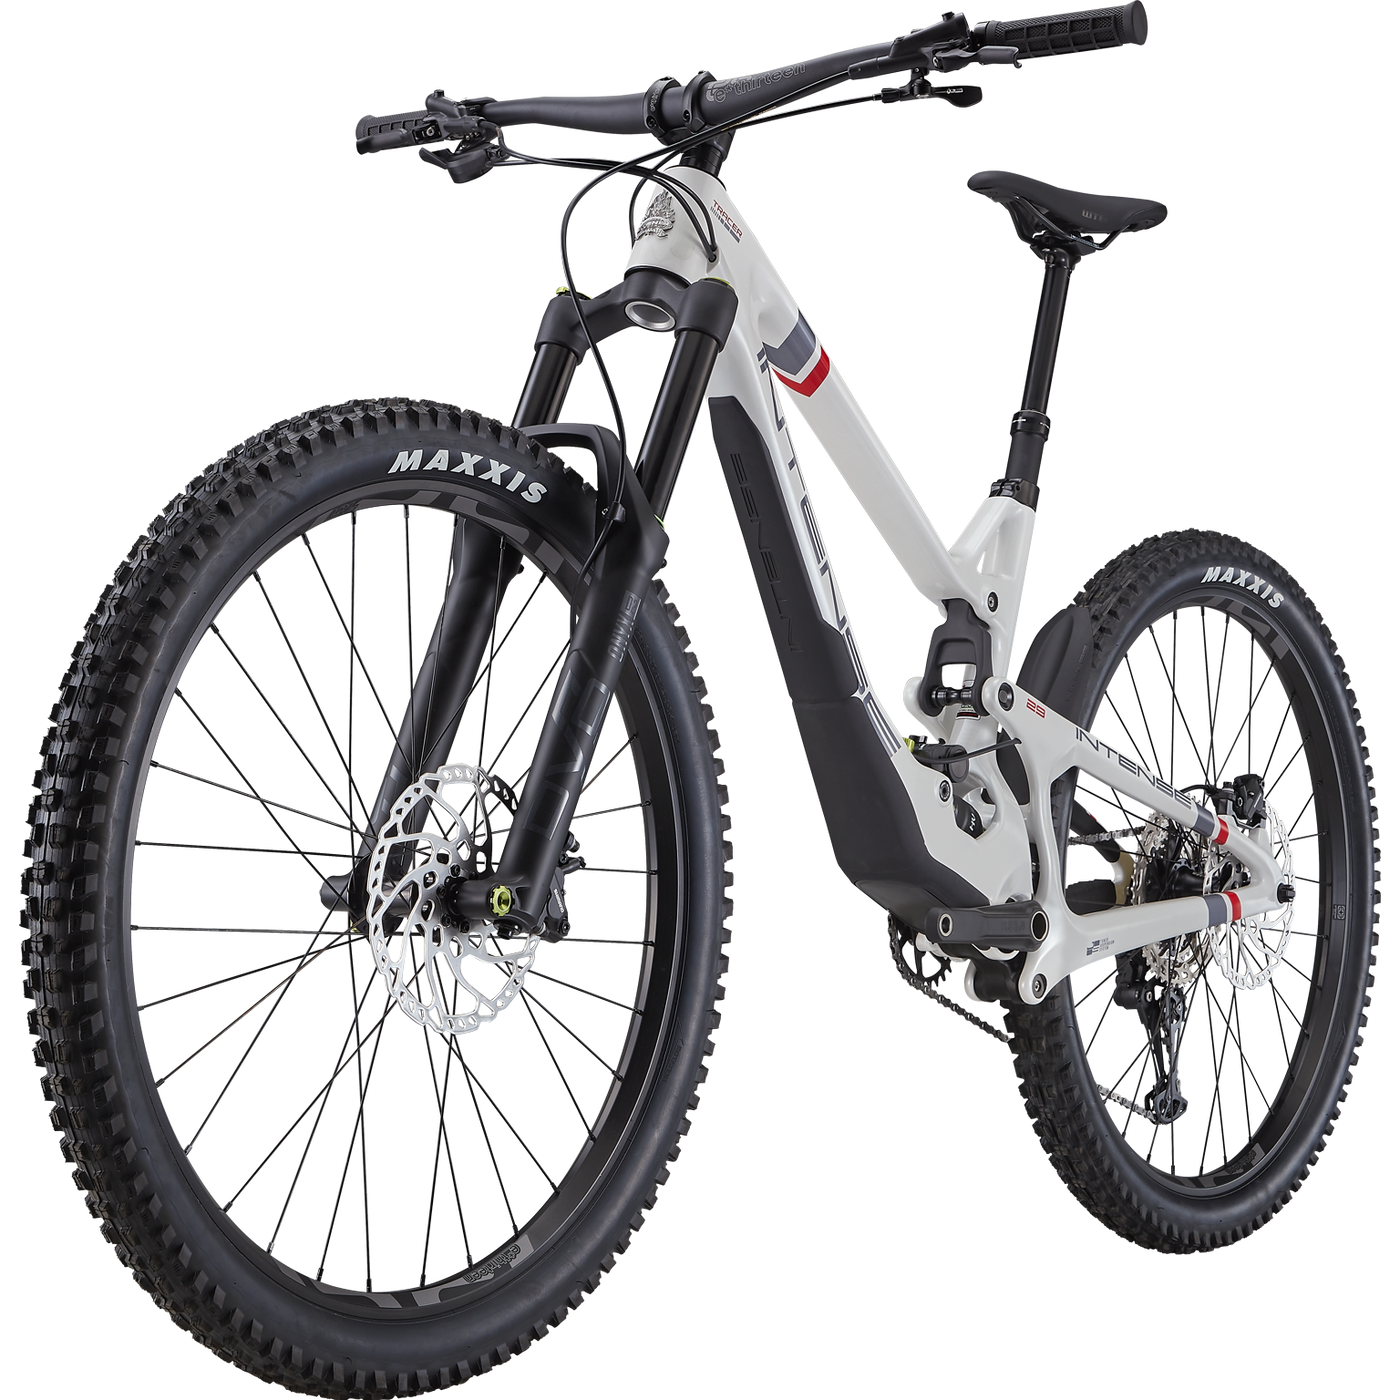 Shop INTENSE Cycles Tracer 29 Expert Carbon Enduro Mountain Bike for sale online or at authorized dealers